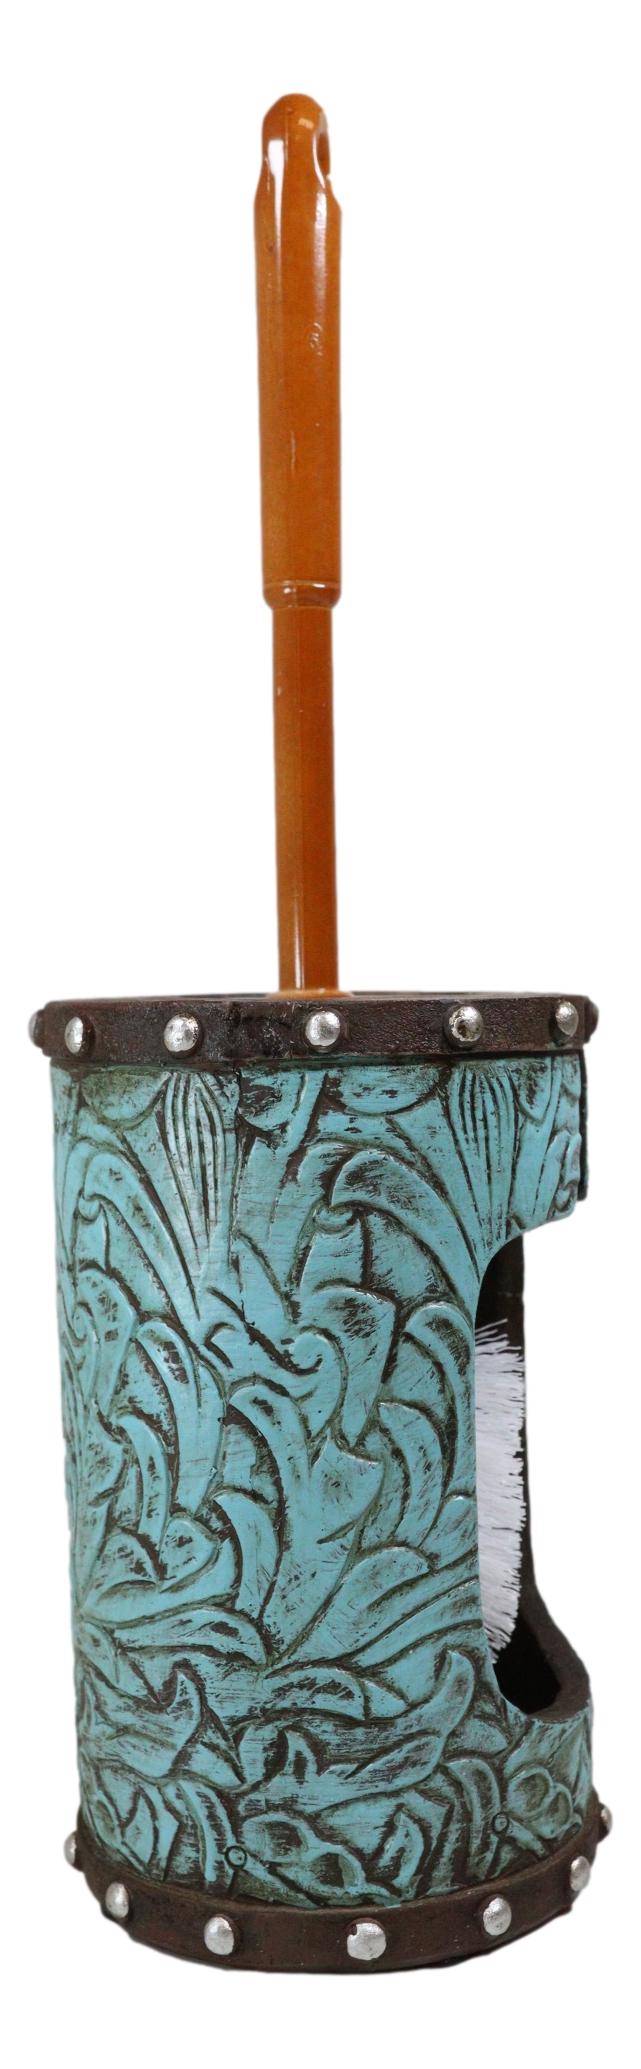 Rustic Vintage Western Turquoise Faux Leather Floral Toilet Brush and Holder Set